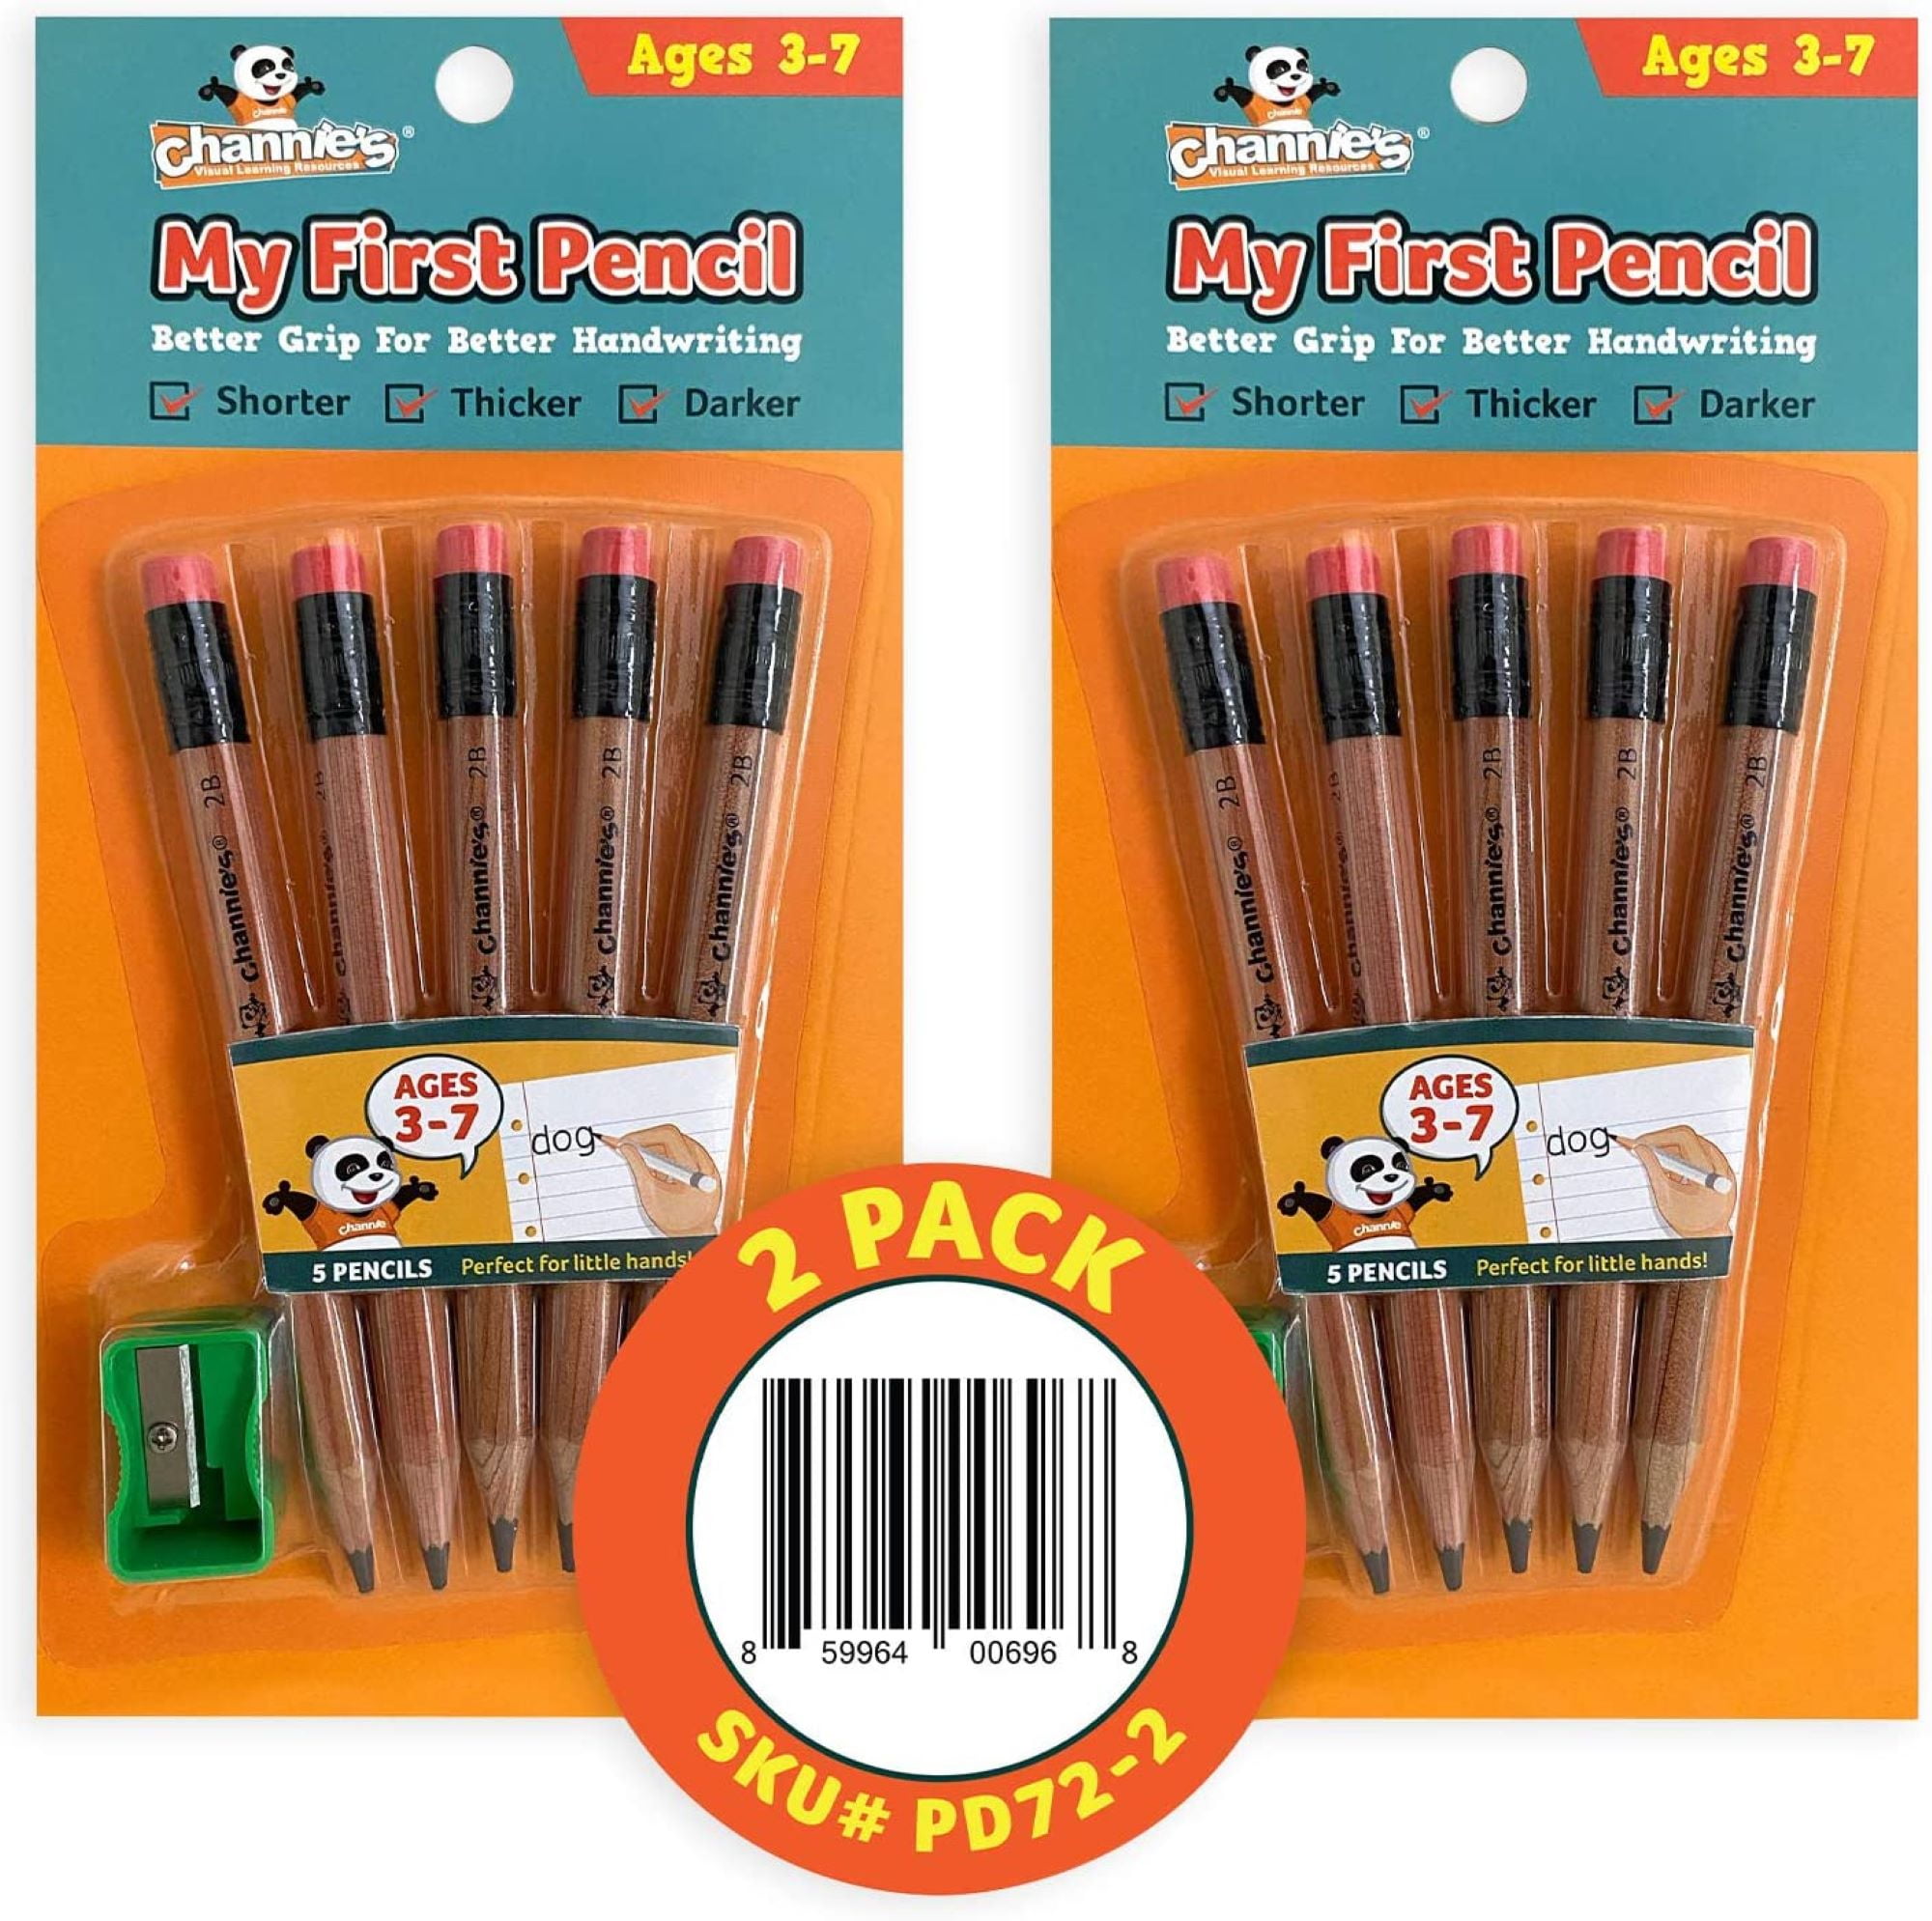 Tombow MONO Drawing Pencil Set 51523 12 Pack Graphite Pencils